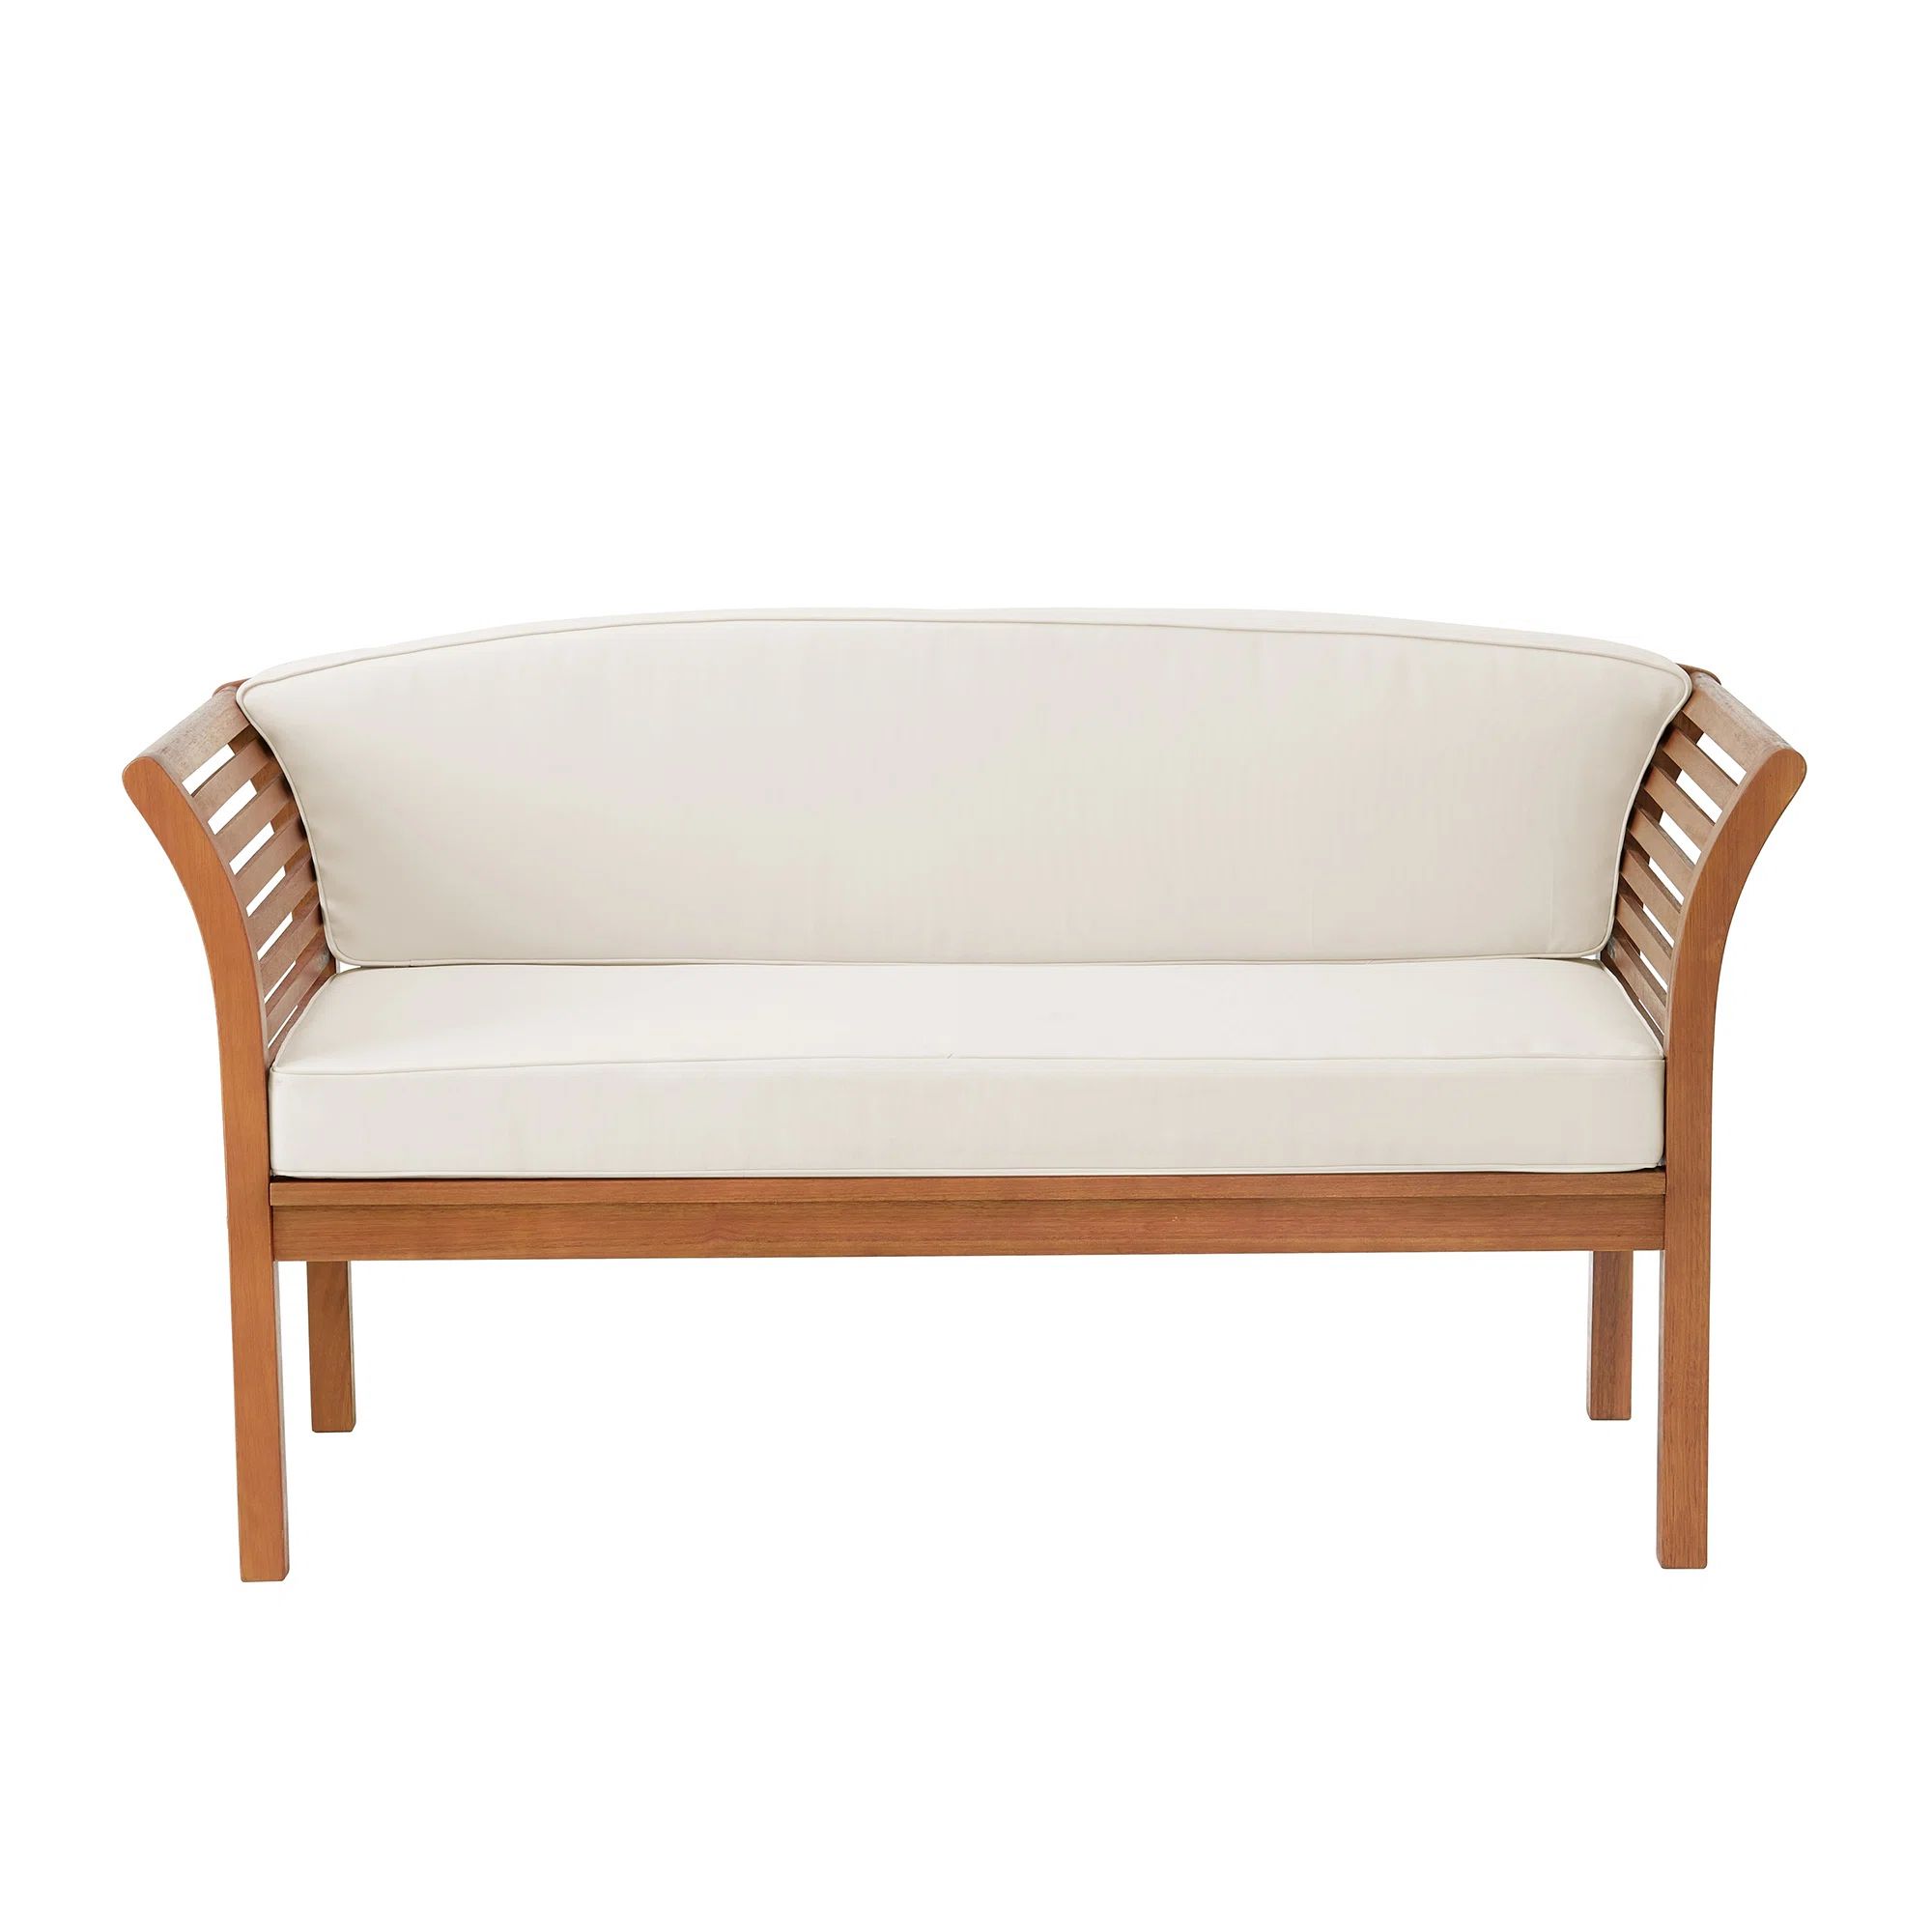 Stamford 57" Wide Solid Wood Outdoor Bench with Cushions | Wayfair North America